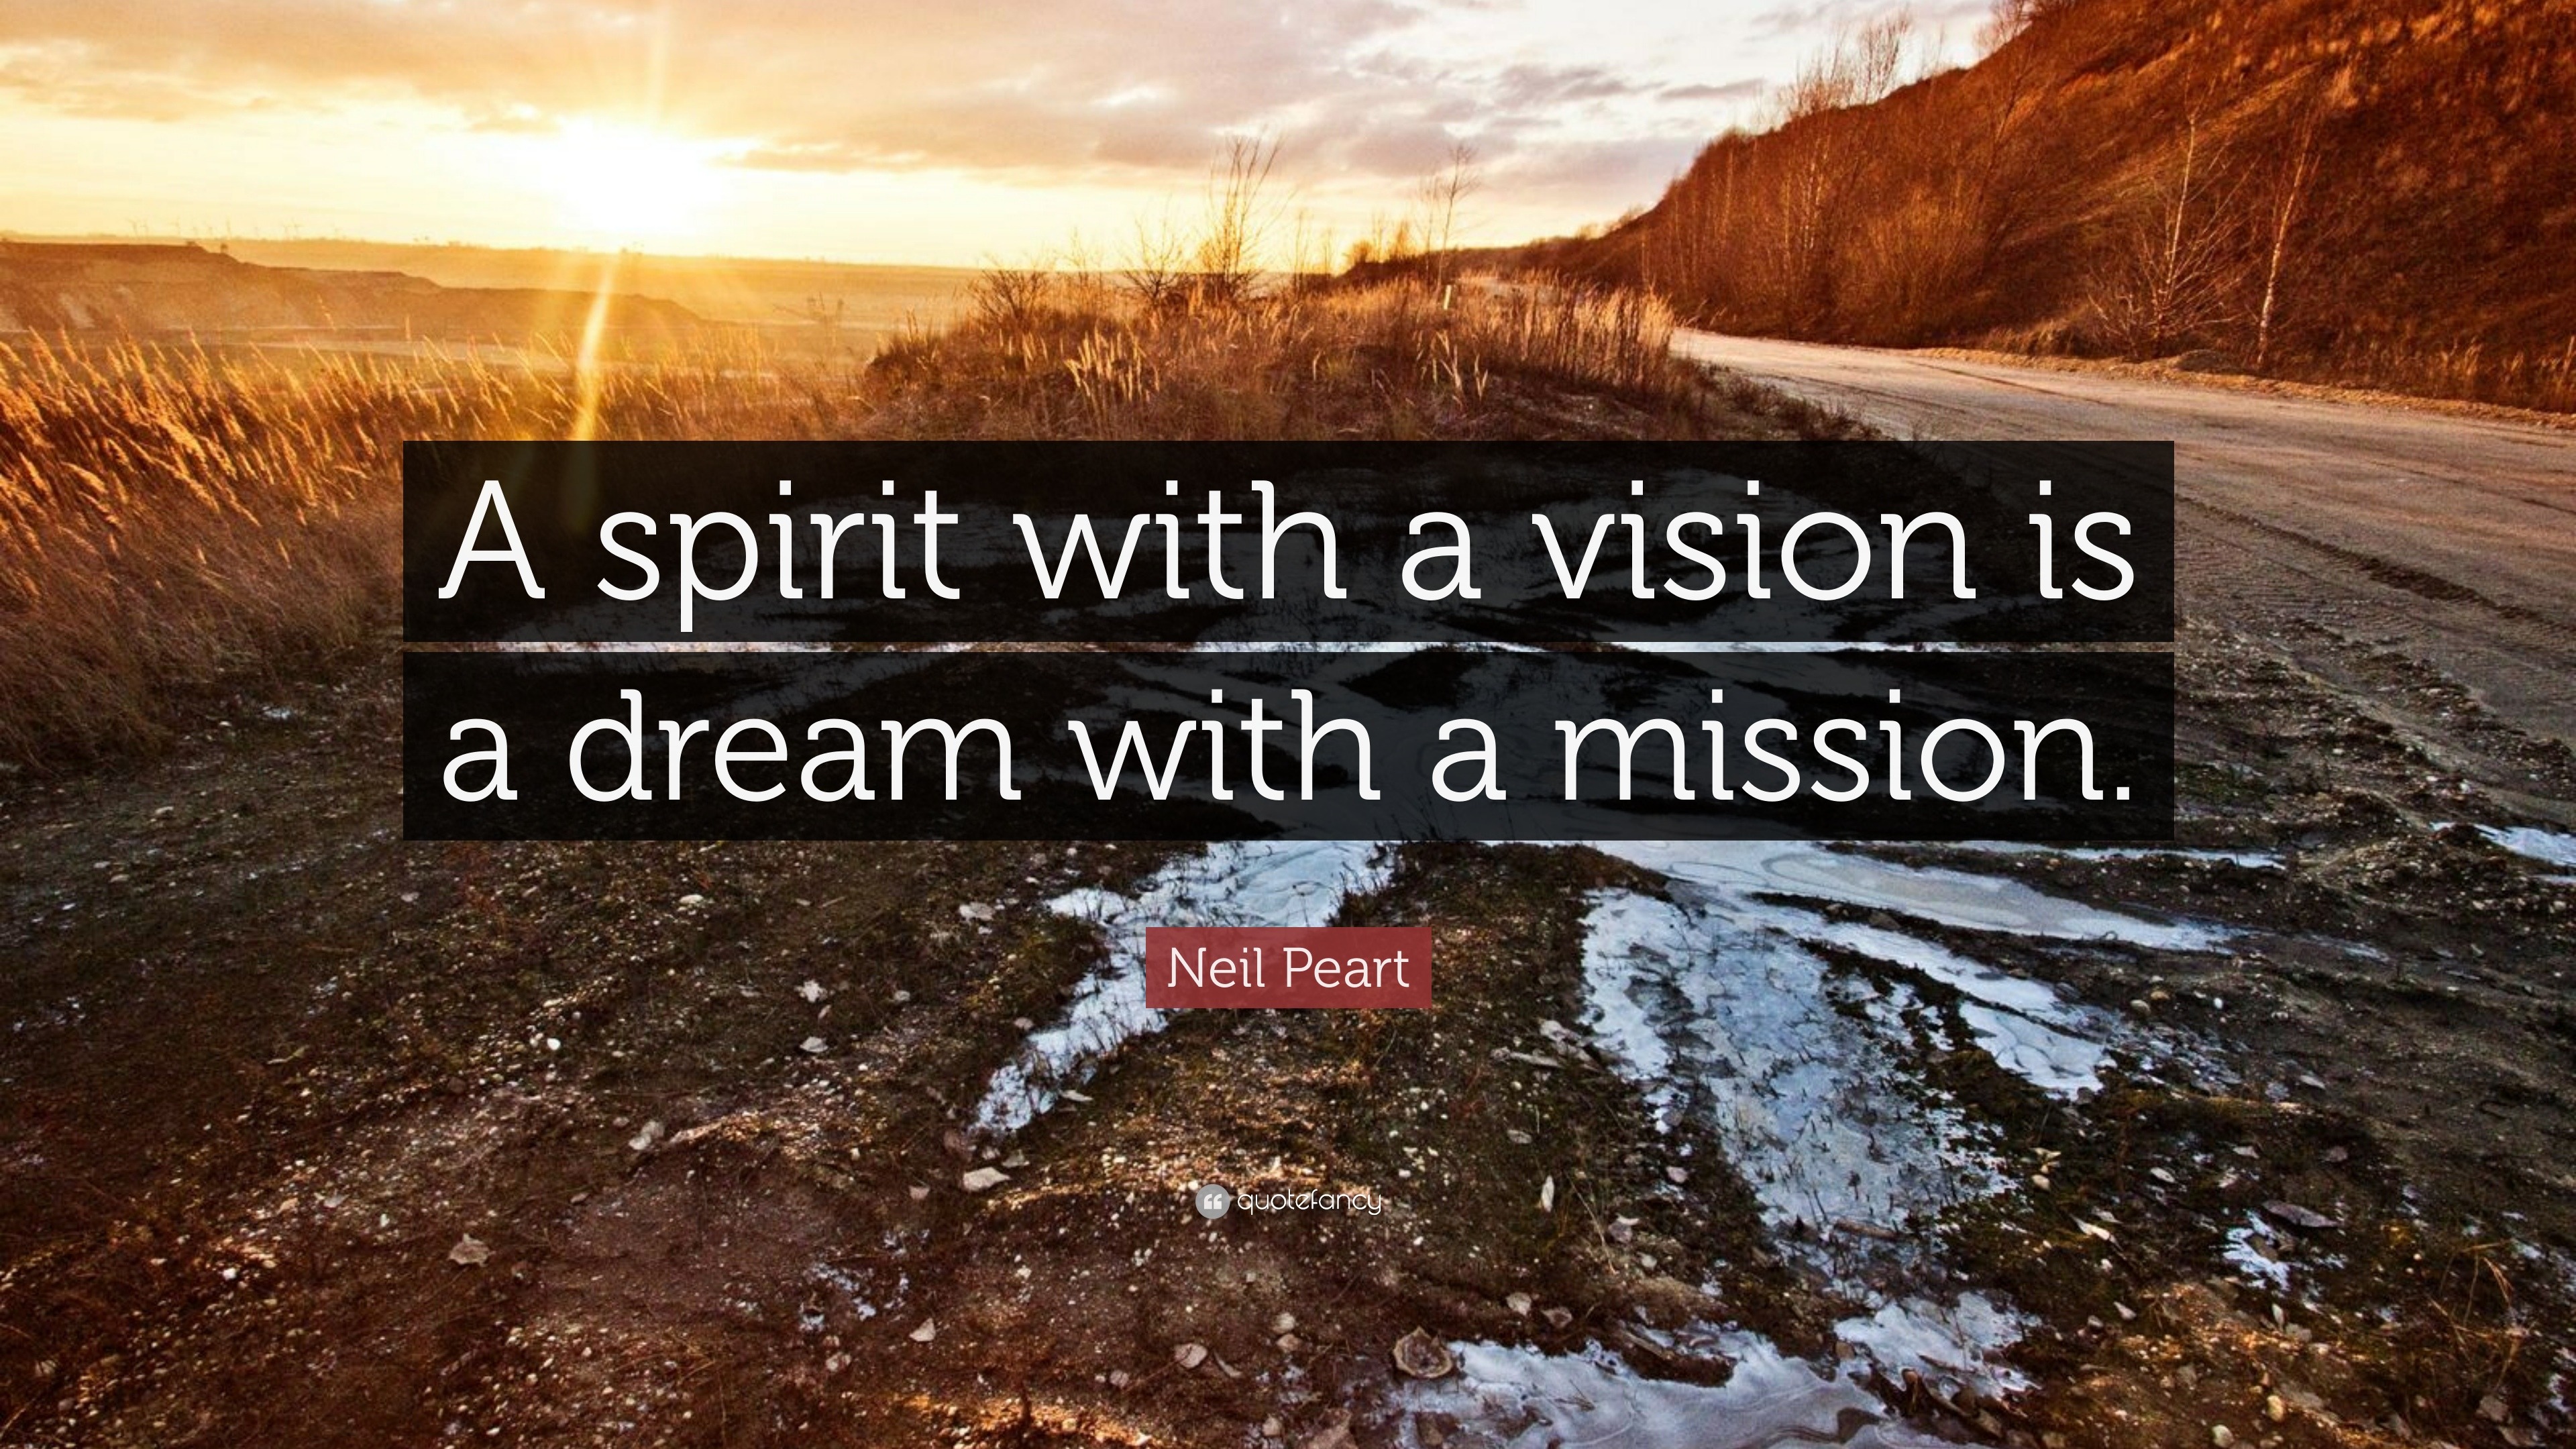 Neil Peart Quote “A spirit with a vision is a dream with